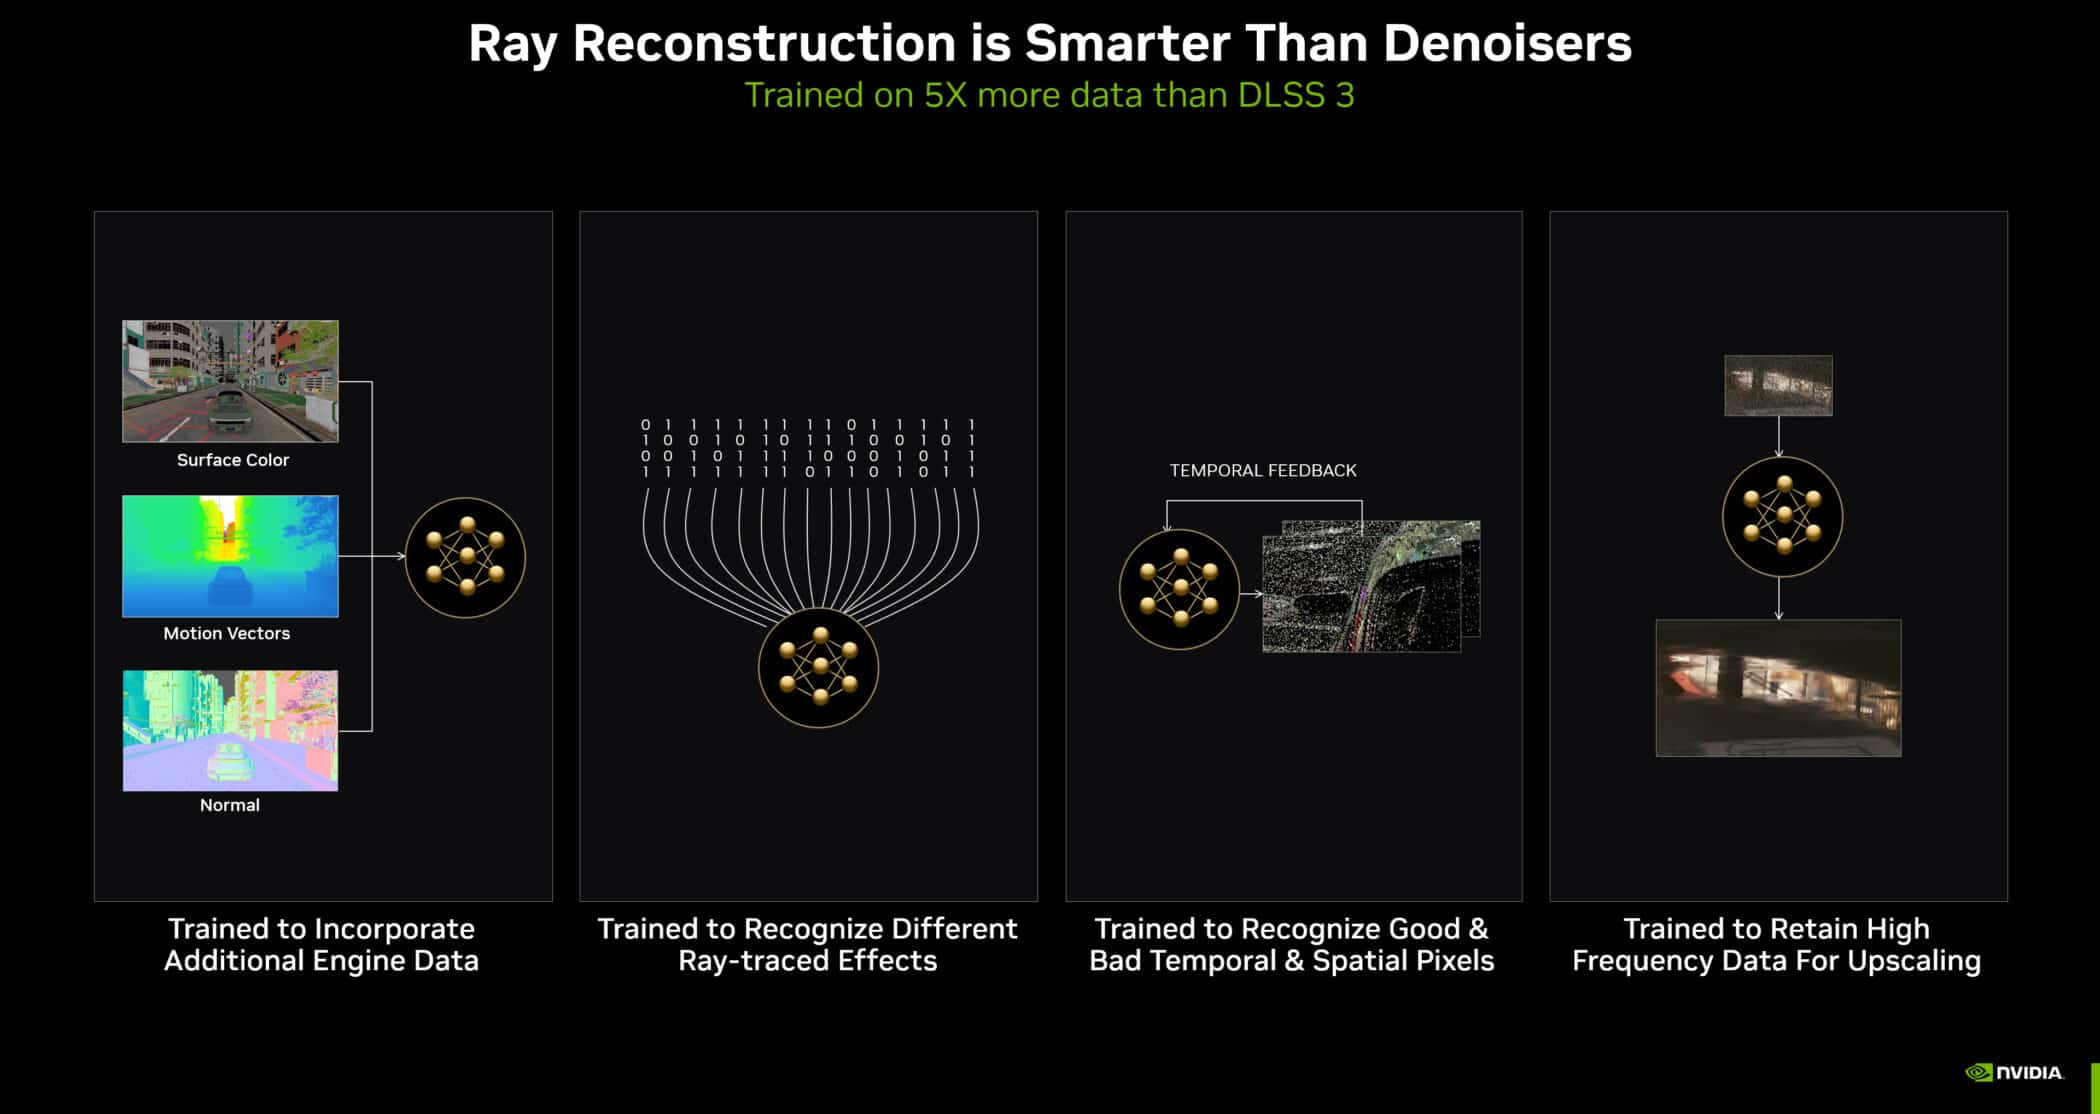 dlss 3 5 ray reconstruction is smarter than denoisers